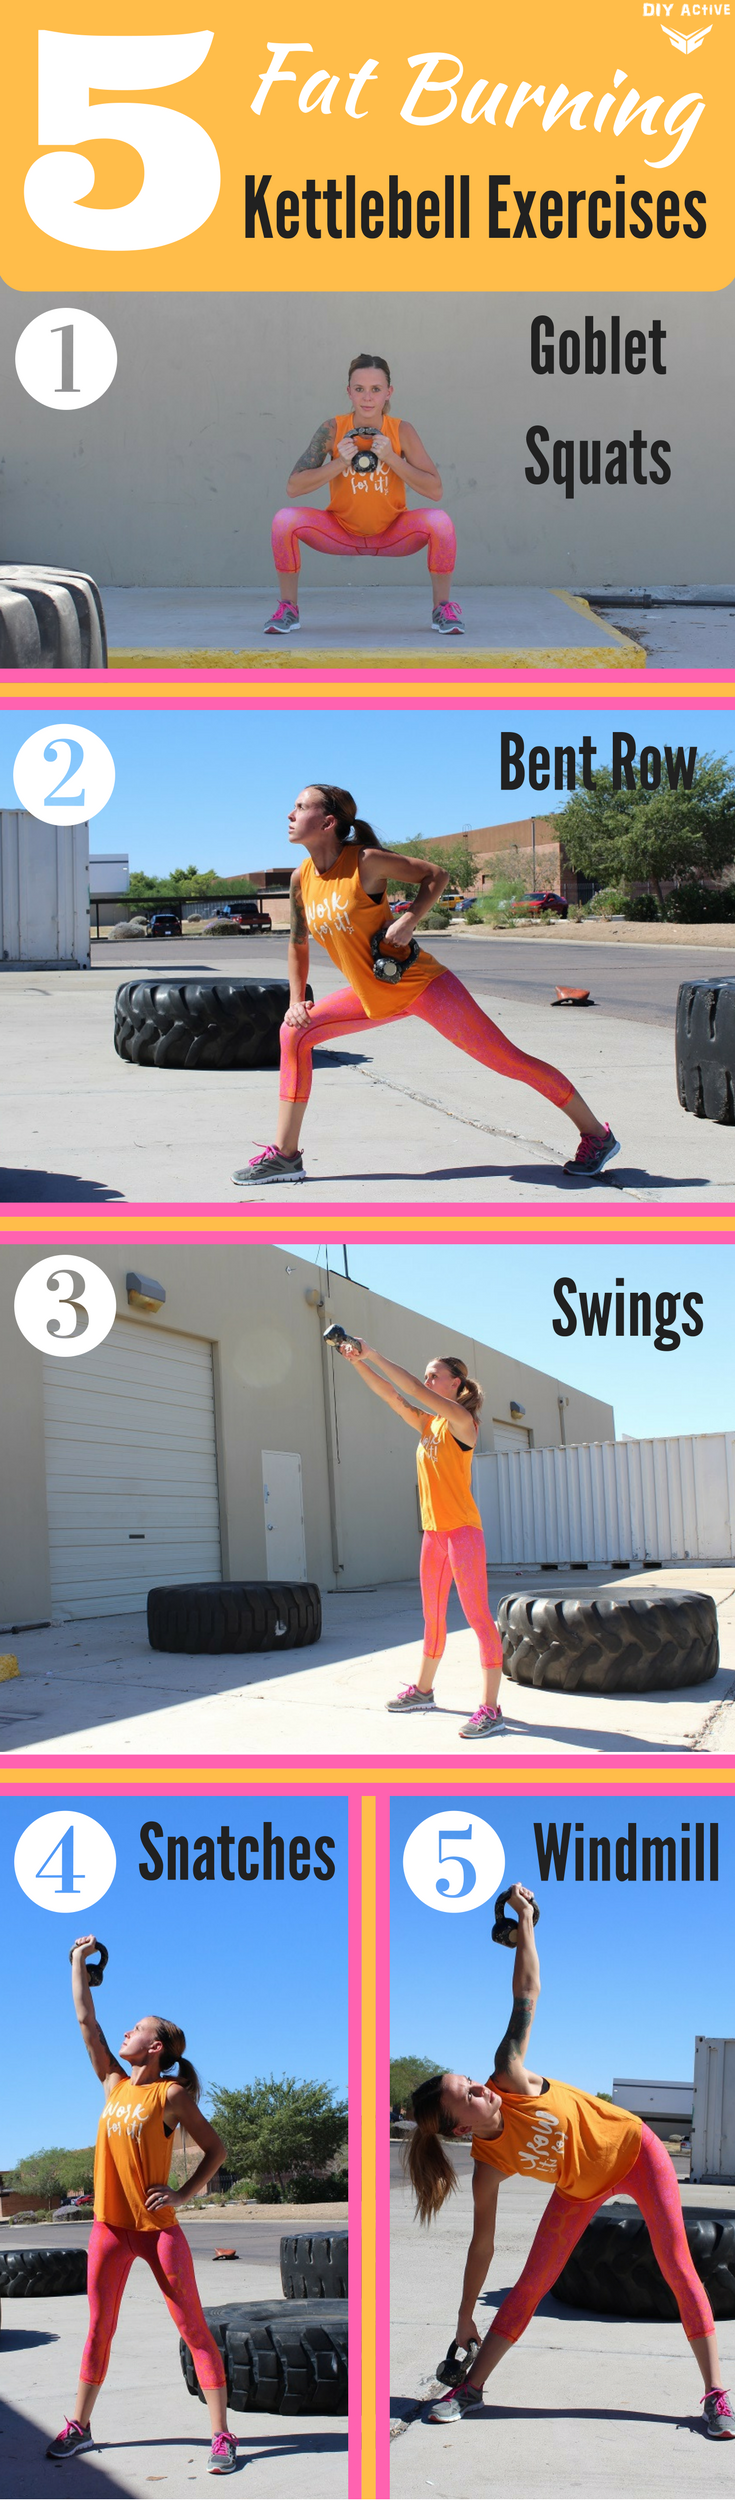 5 Kettlebell Exercises to Add to Your Workout Routine